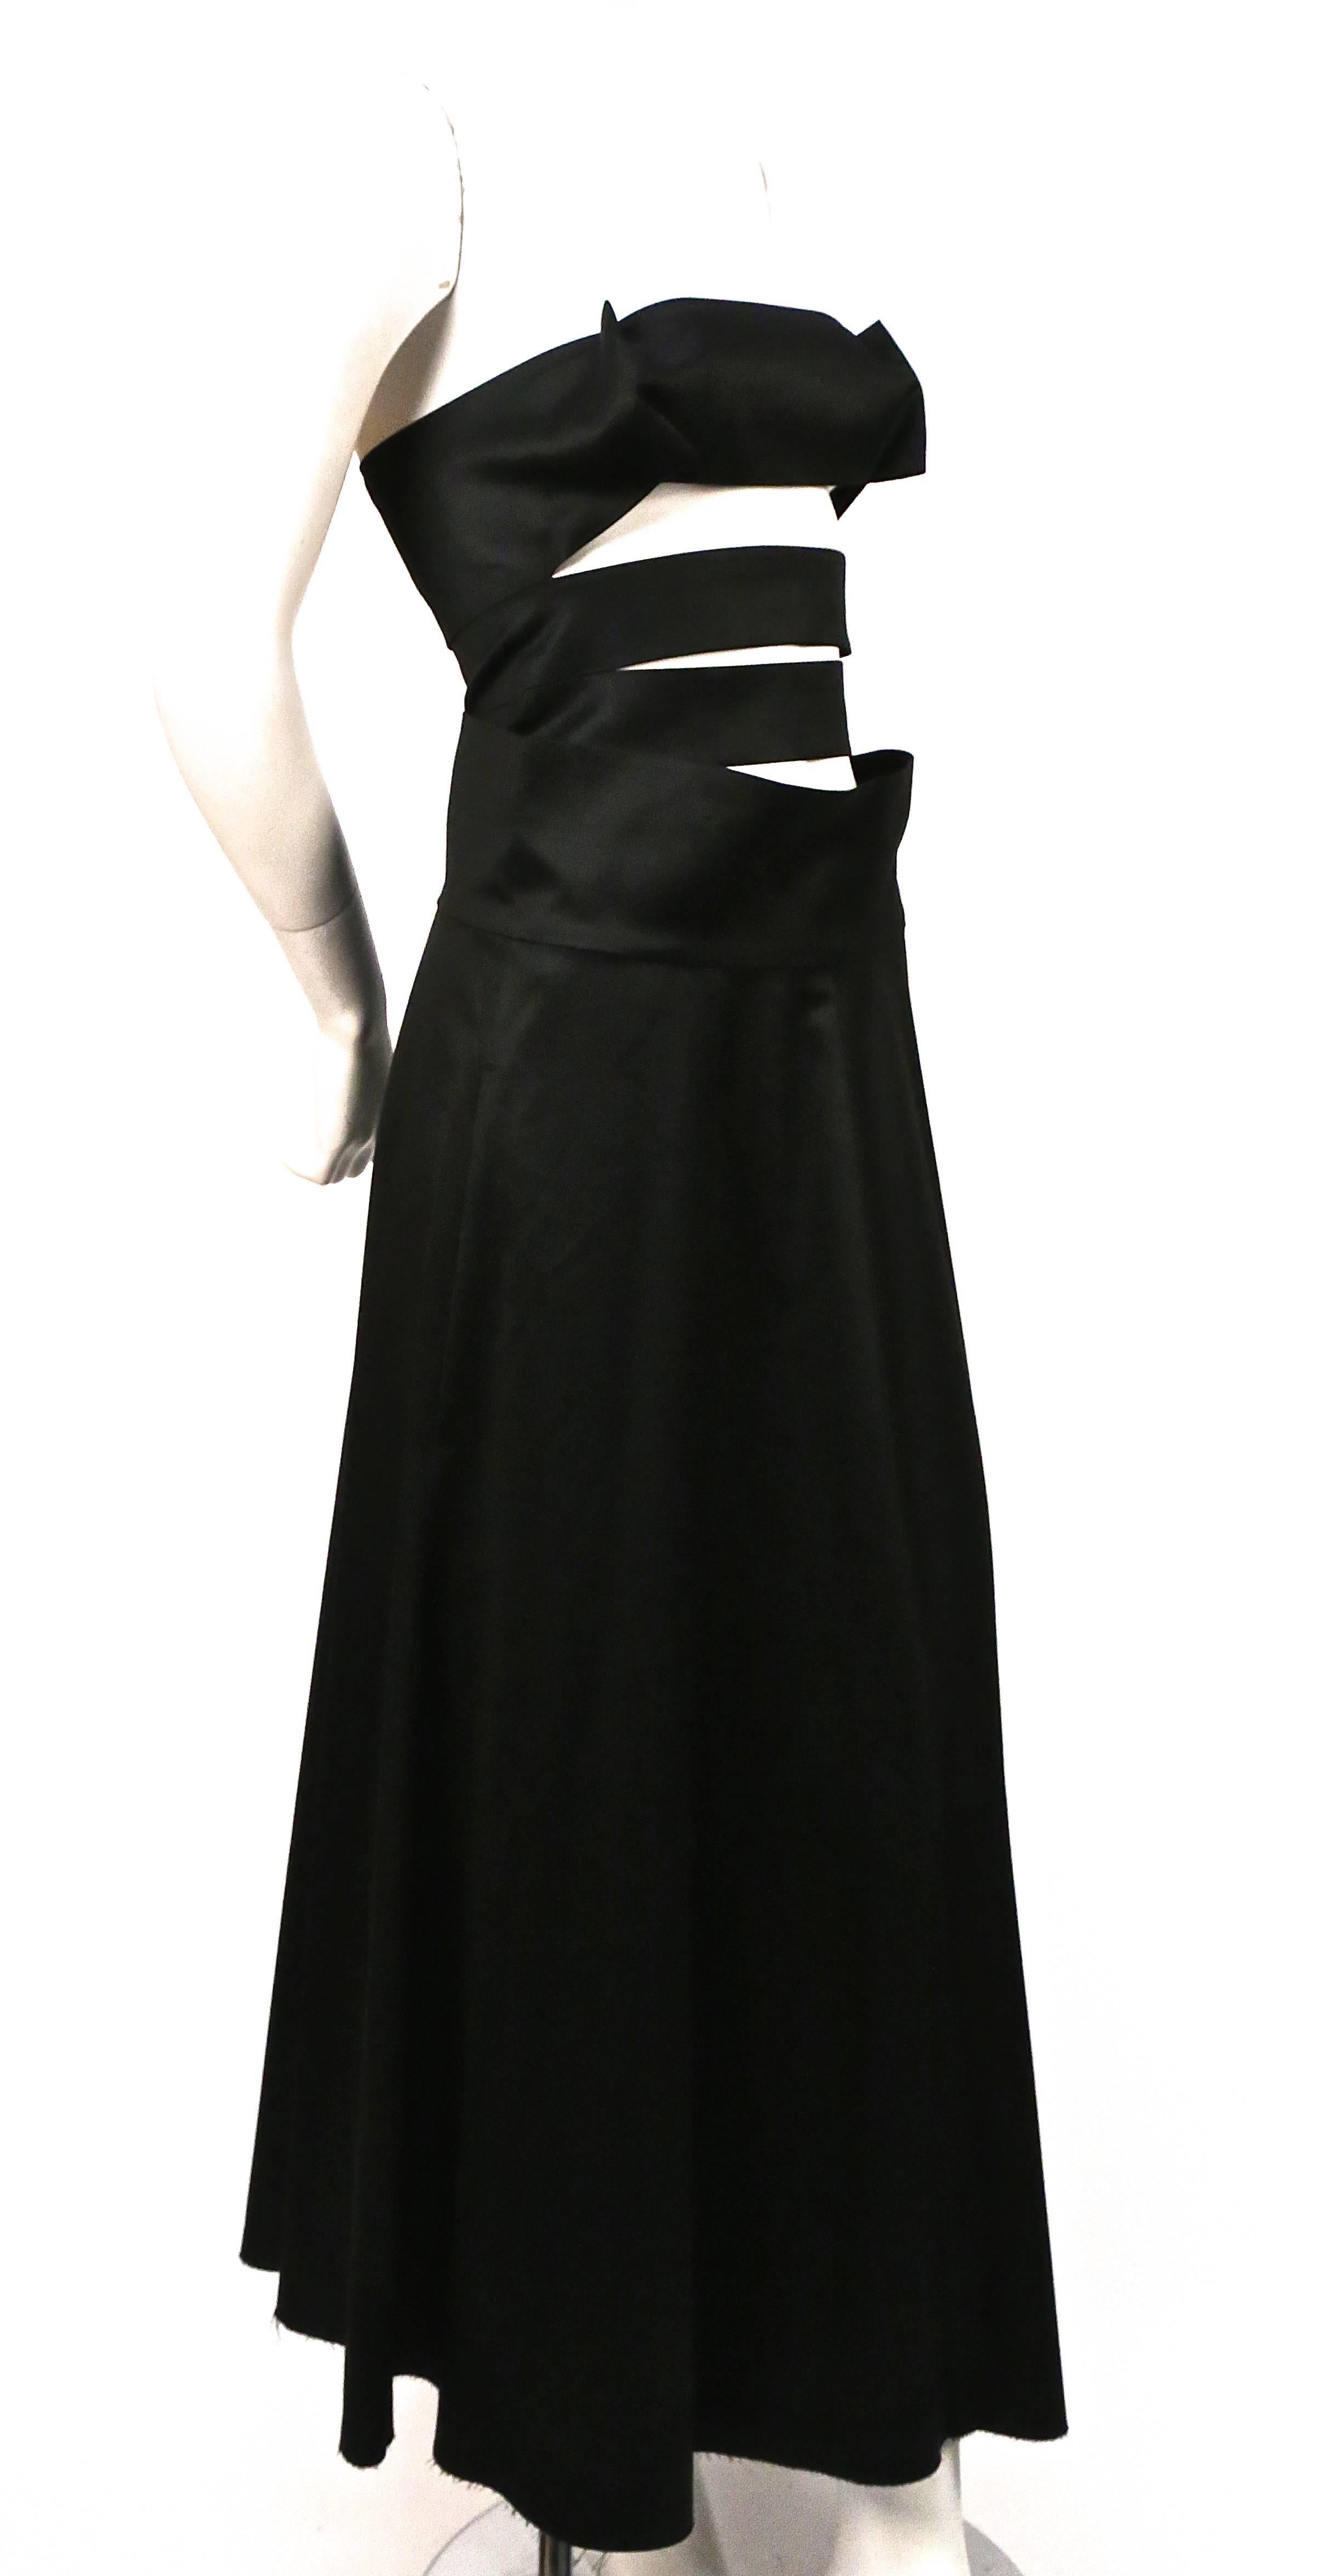 Jet black strapless dress with unique cut out bodice from Yohji Yamamoto dating to spring 2003 exactly as seen on the runway.  Japanese size 1. Approximate measurements: bust 32" and length 49". Silver side zip closure. One hidden pocket